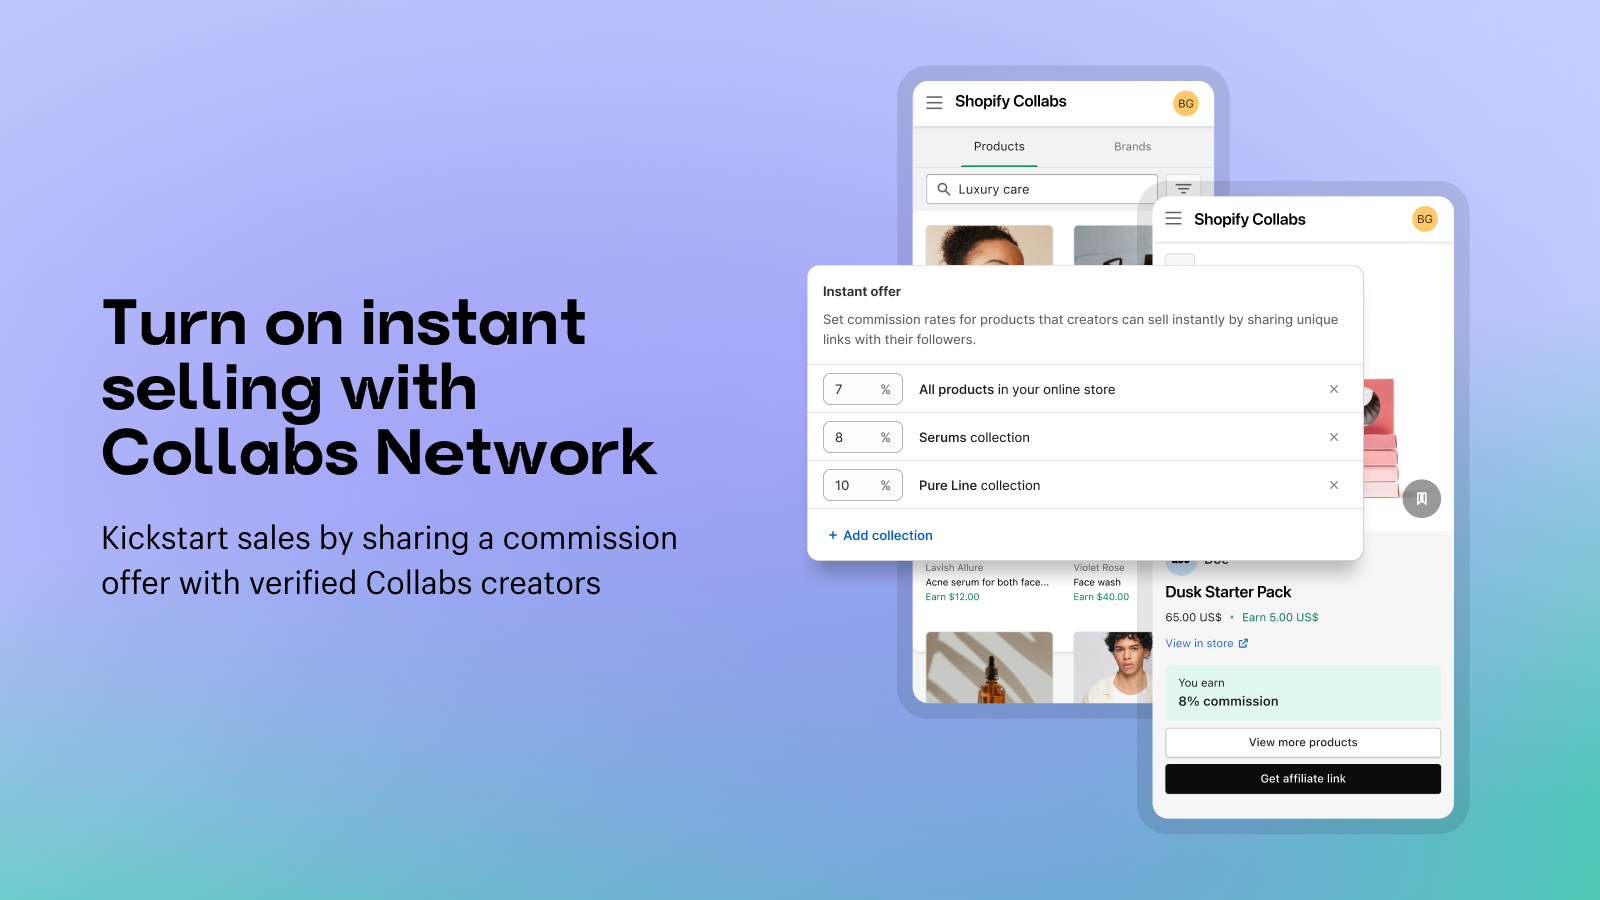 Turn on instant selling with Collabs Network